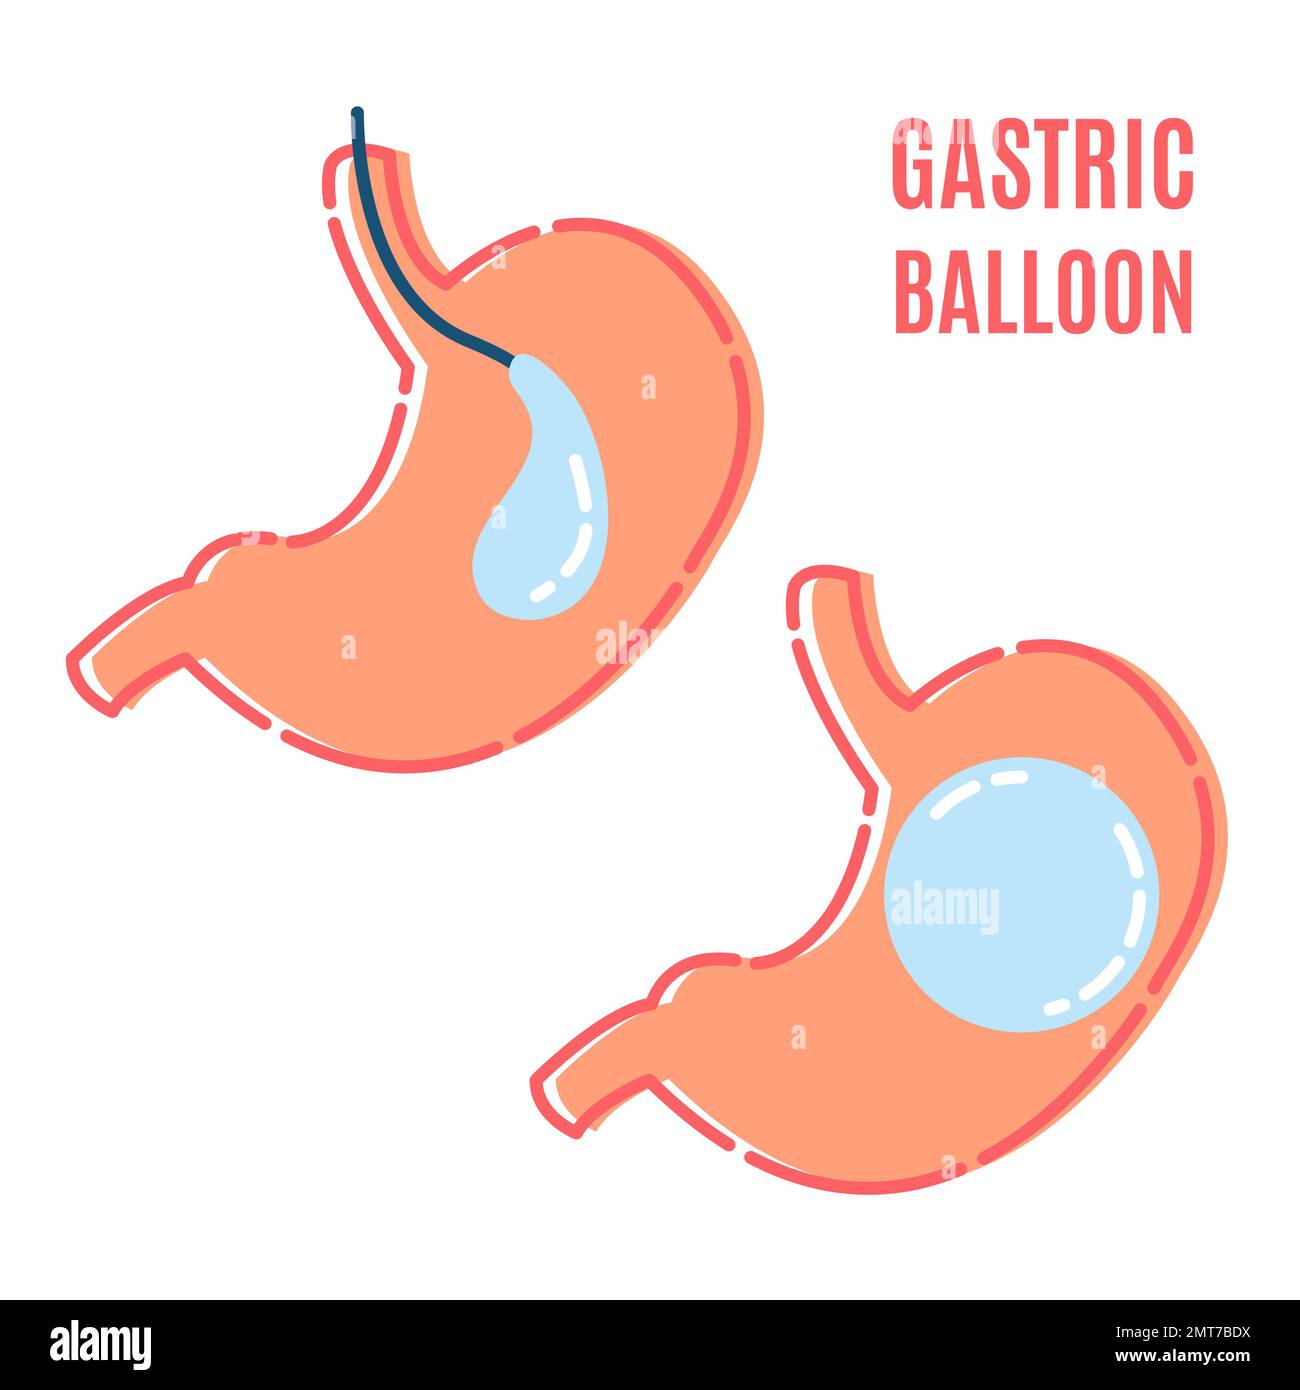 Gastric Balloon Weight Loss Procedure Shown In Stomach Stock Vector Image And Art Alamy